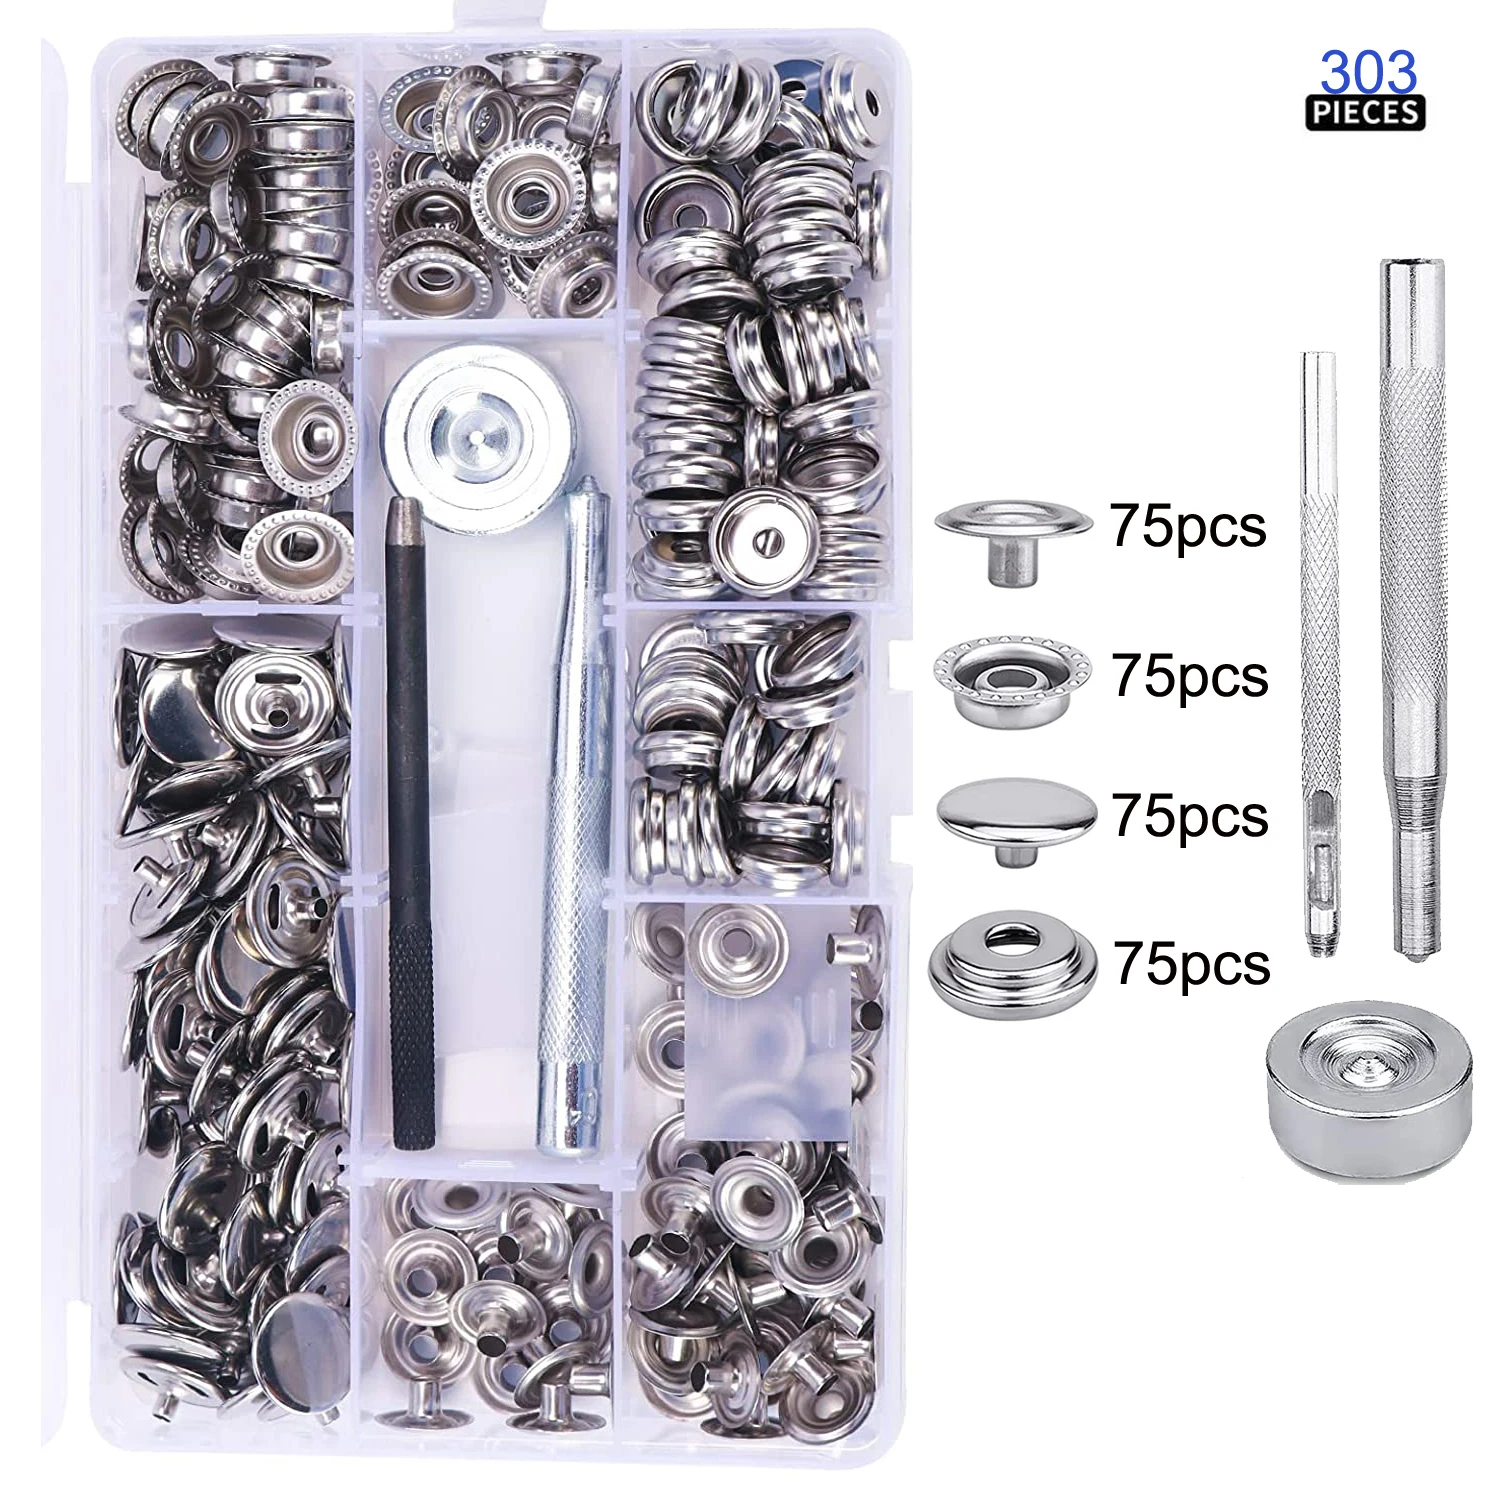 103pcs 1/2Inch Leather Snap Fasteners Kit Metal Button Snaps with Installation Tools for Tent Boat Canvas Leather Craft 